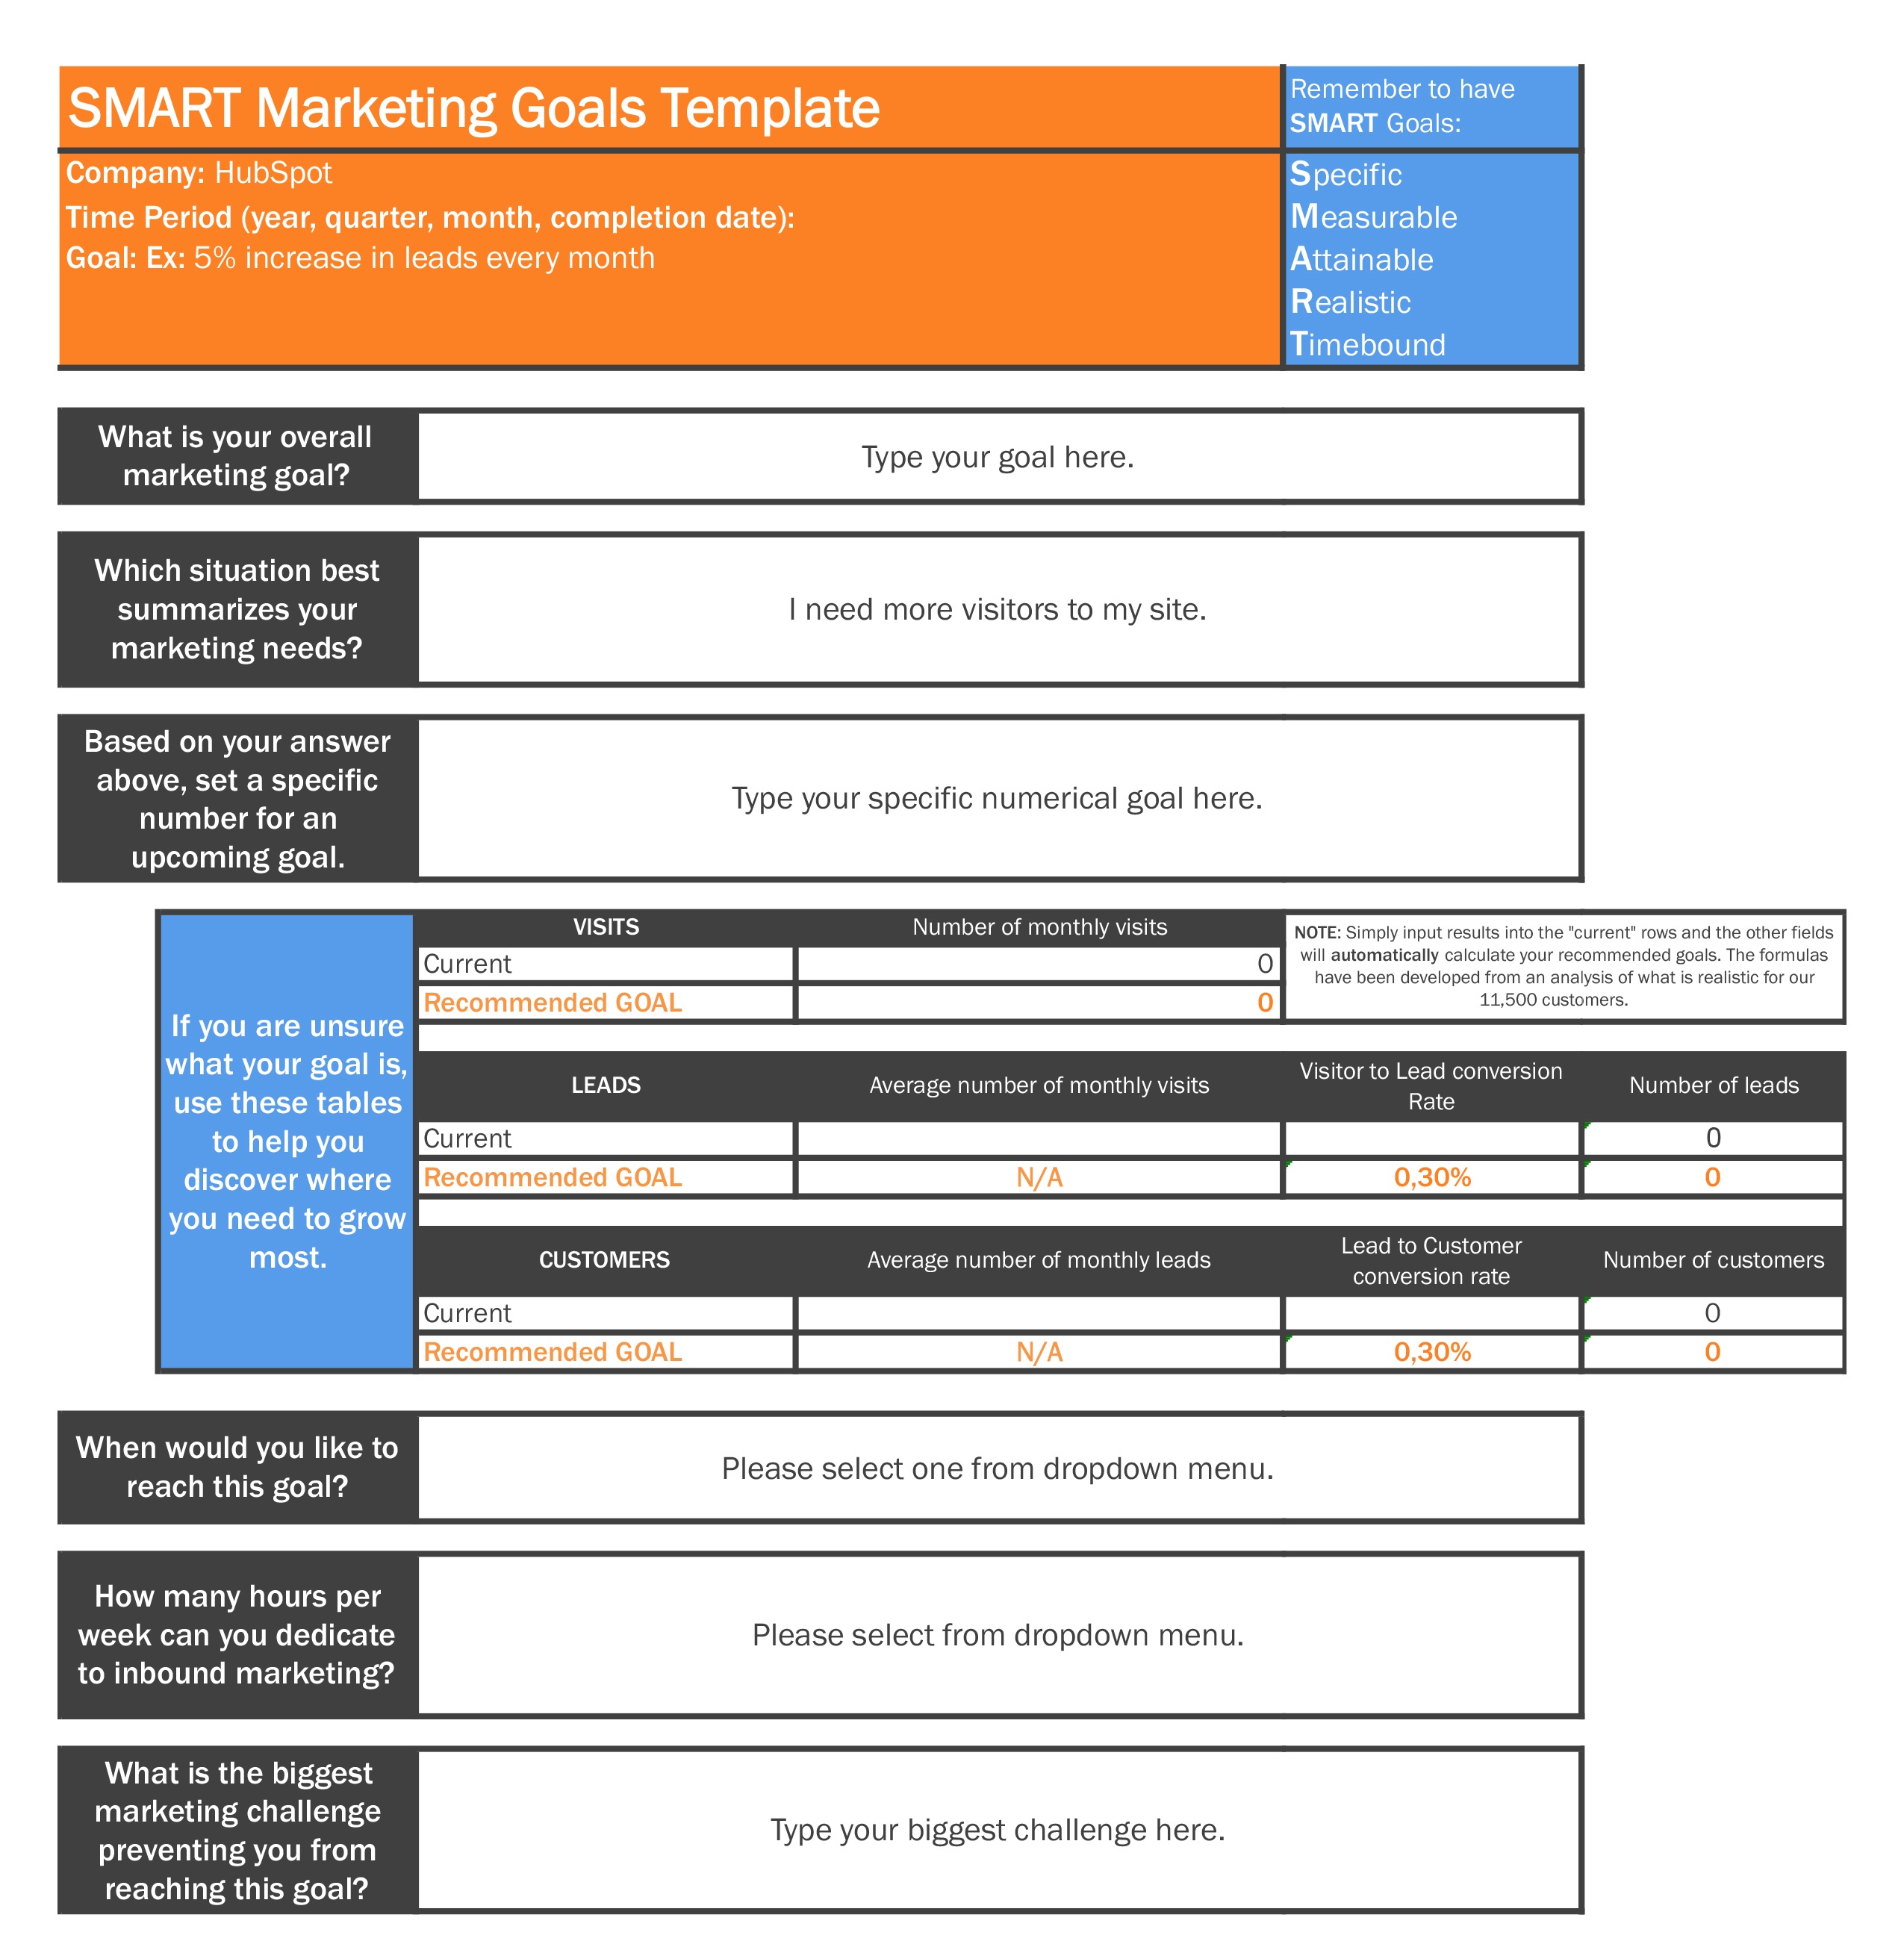 How to Set Your SMART Marketing Goals with This Template Whether you have short-term or long-term goals, this planning template can help you manage the process. The template will help you clearly describe your goals, set a deadline for meeting them, and understand the desired end result. This will all be accomplished by focusing on SMART, a methodology that helps you make, well, 